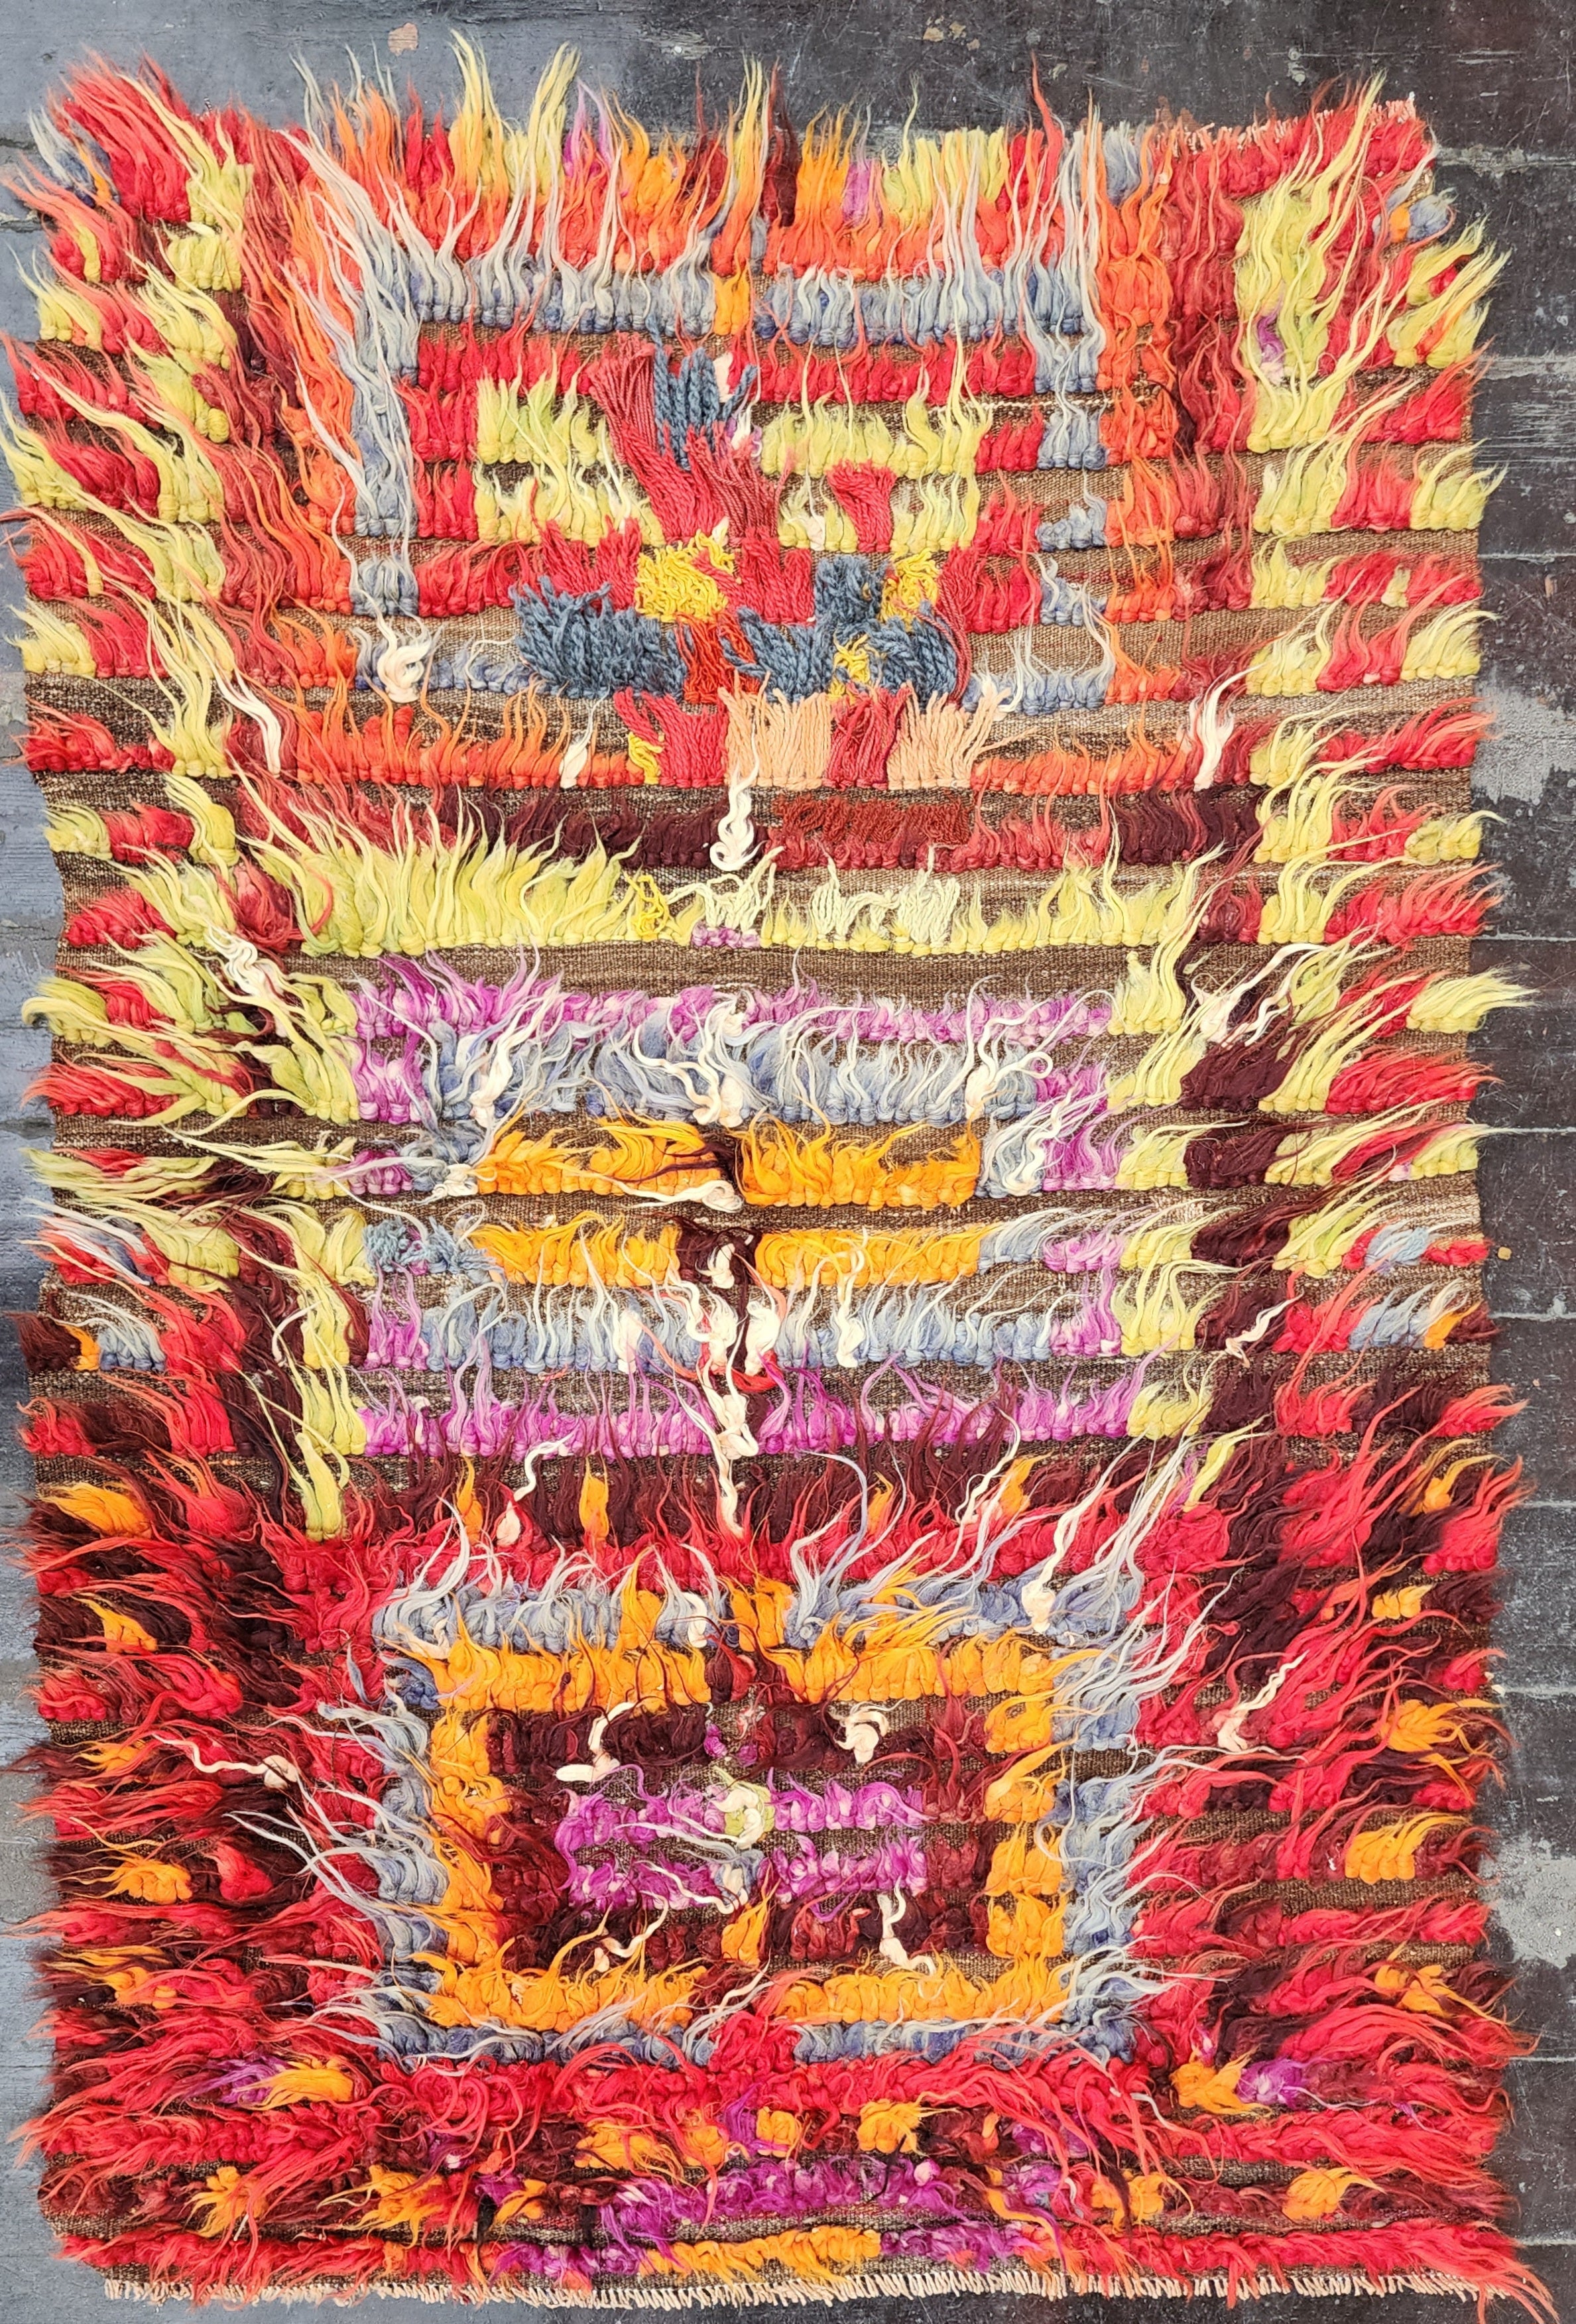 Turkish Filikli Tulu Rug, 5 ft 2 in x 3 ft 5 in, Red, Orange, Purple and Yellow Shaggy Pile Kilim Handmade from Natural Wool